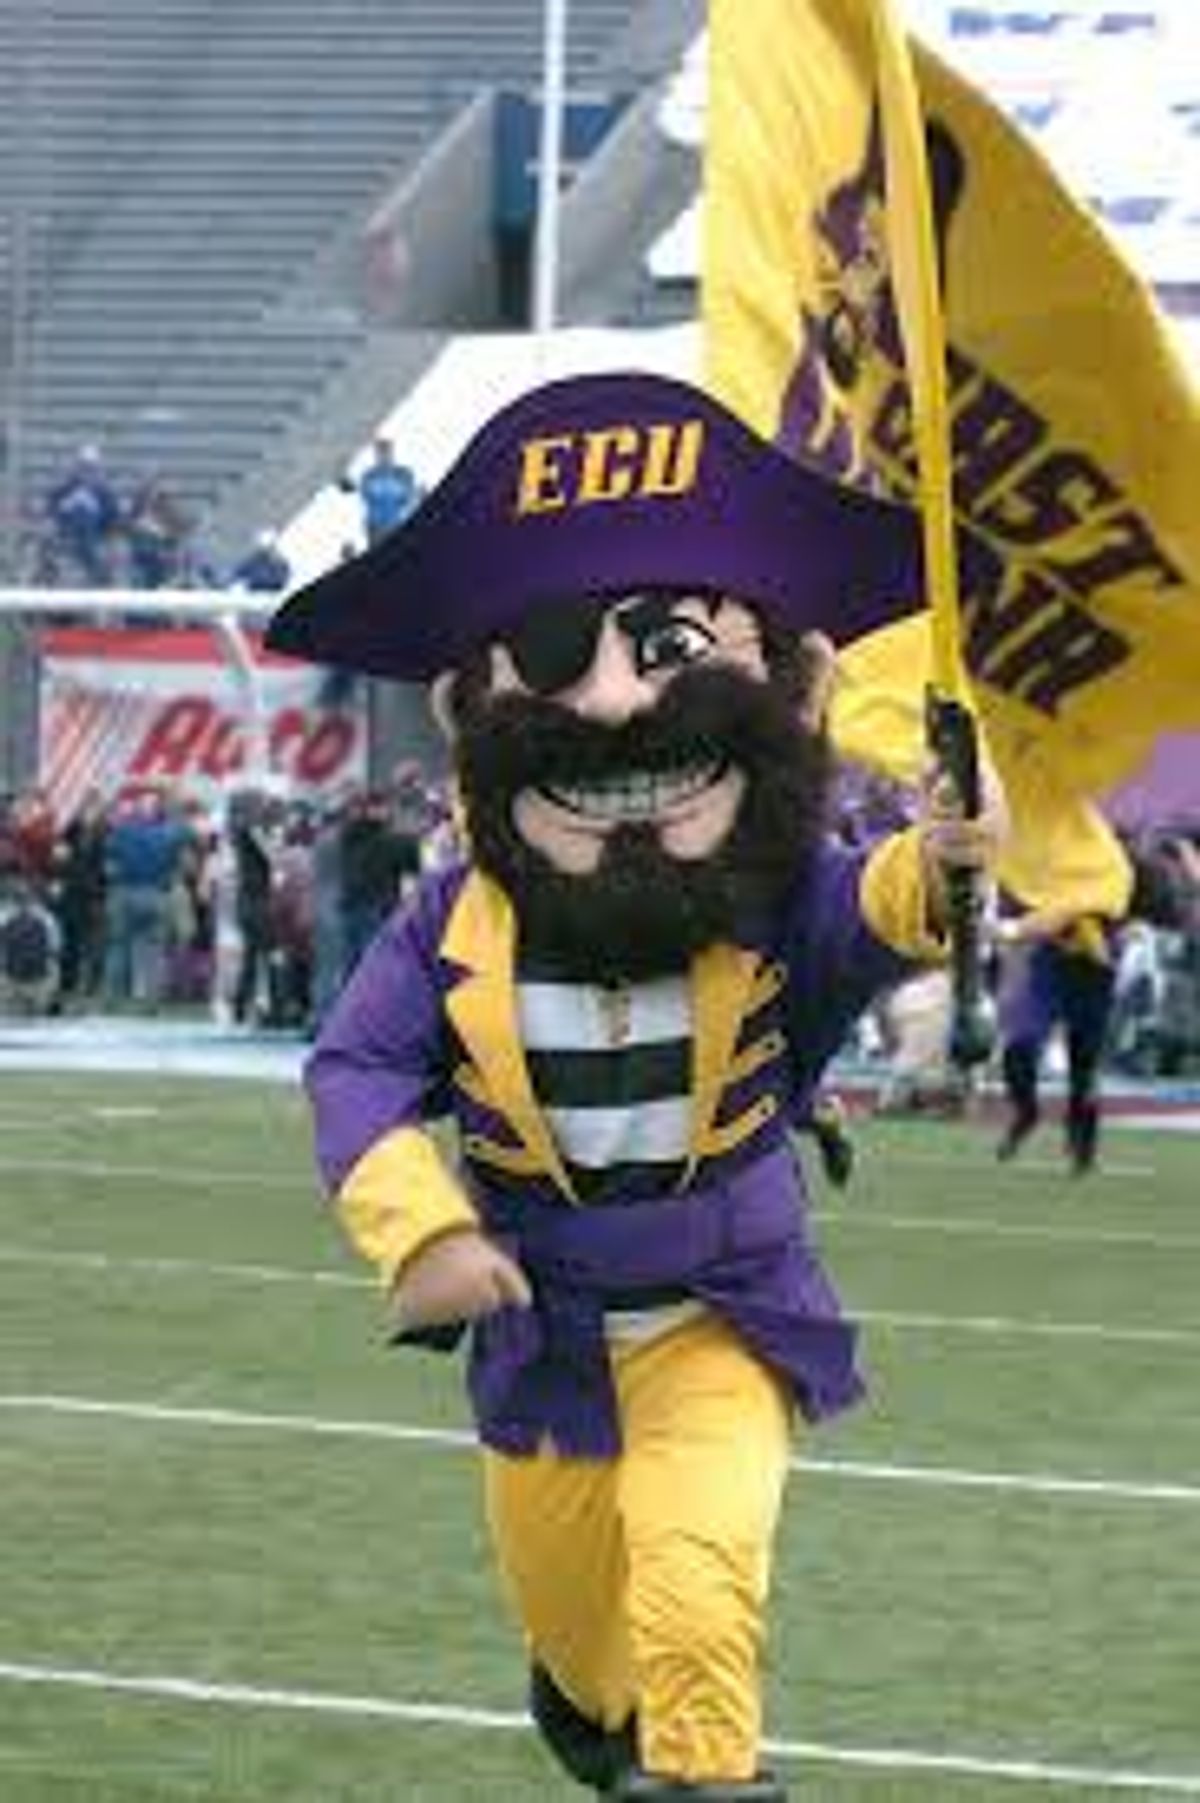 20 Reasons We're All Ready To Get Back To ECU